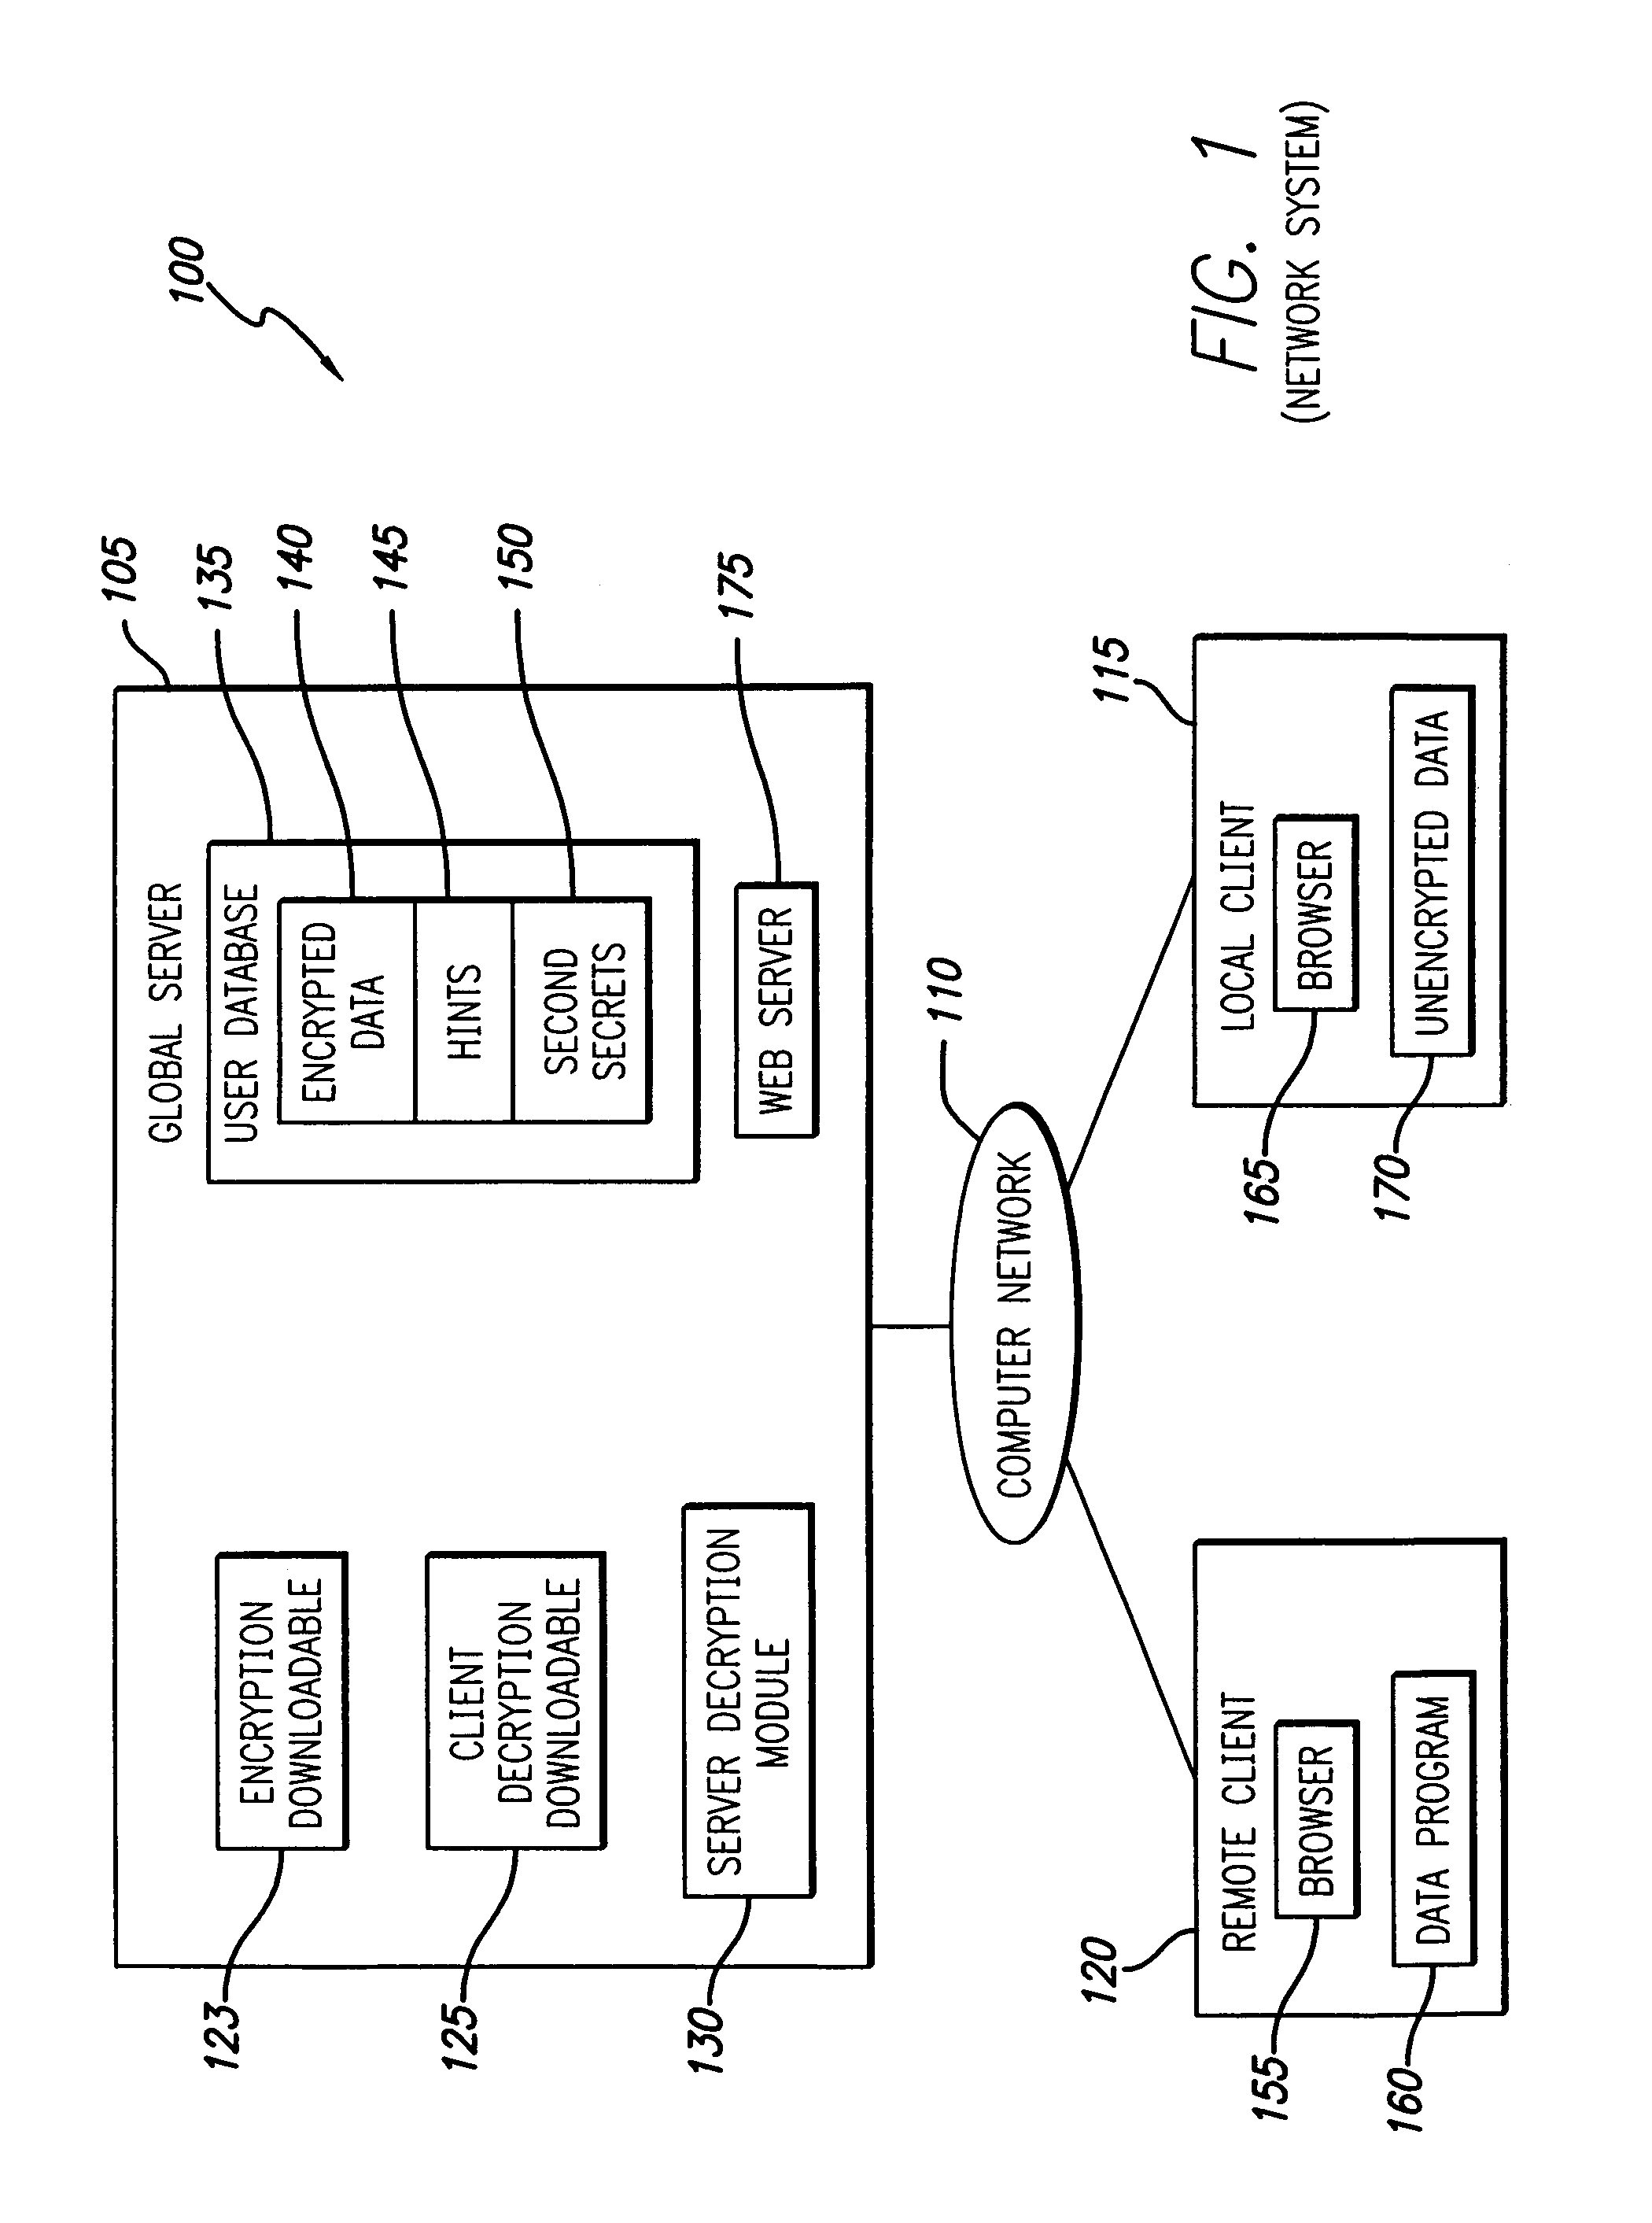 System and method for encrypting and decrypting files